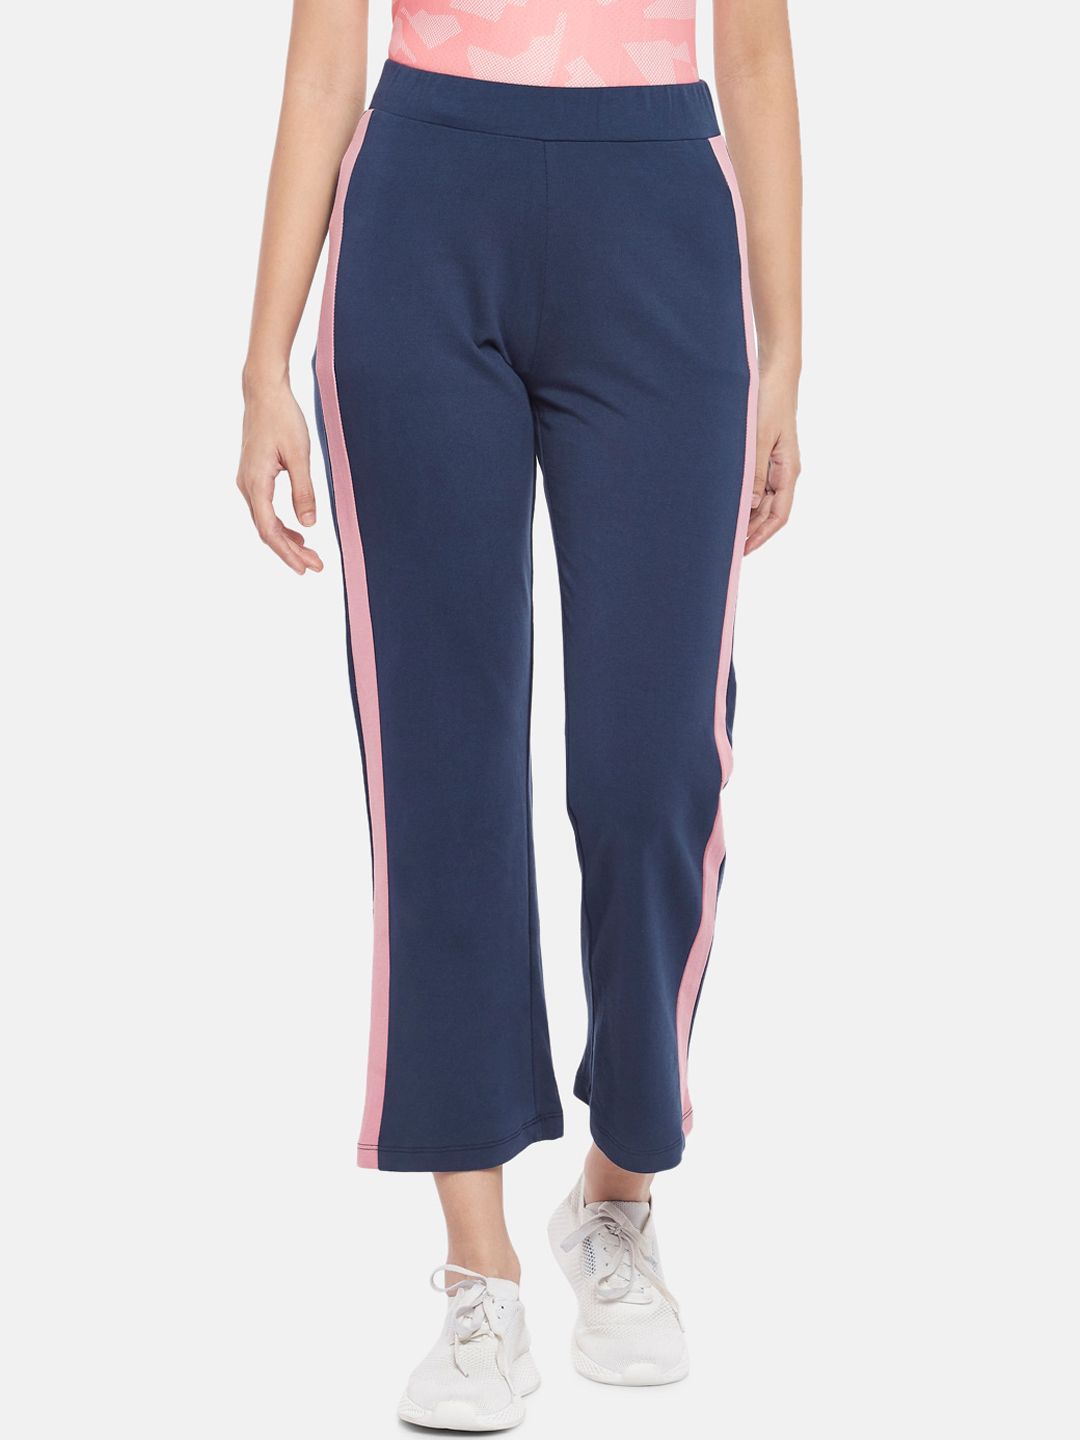 Ajile by Pantaloons Women Navy Blue & Pink Solid Pure Cotton Track Pants Price in India